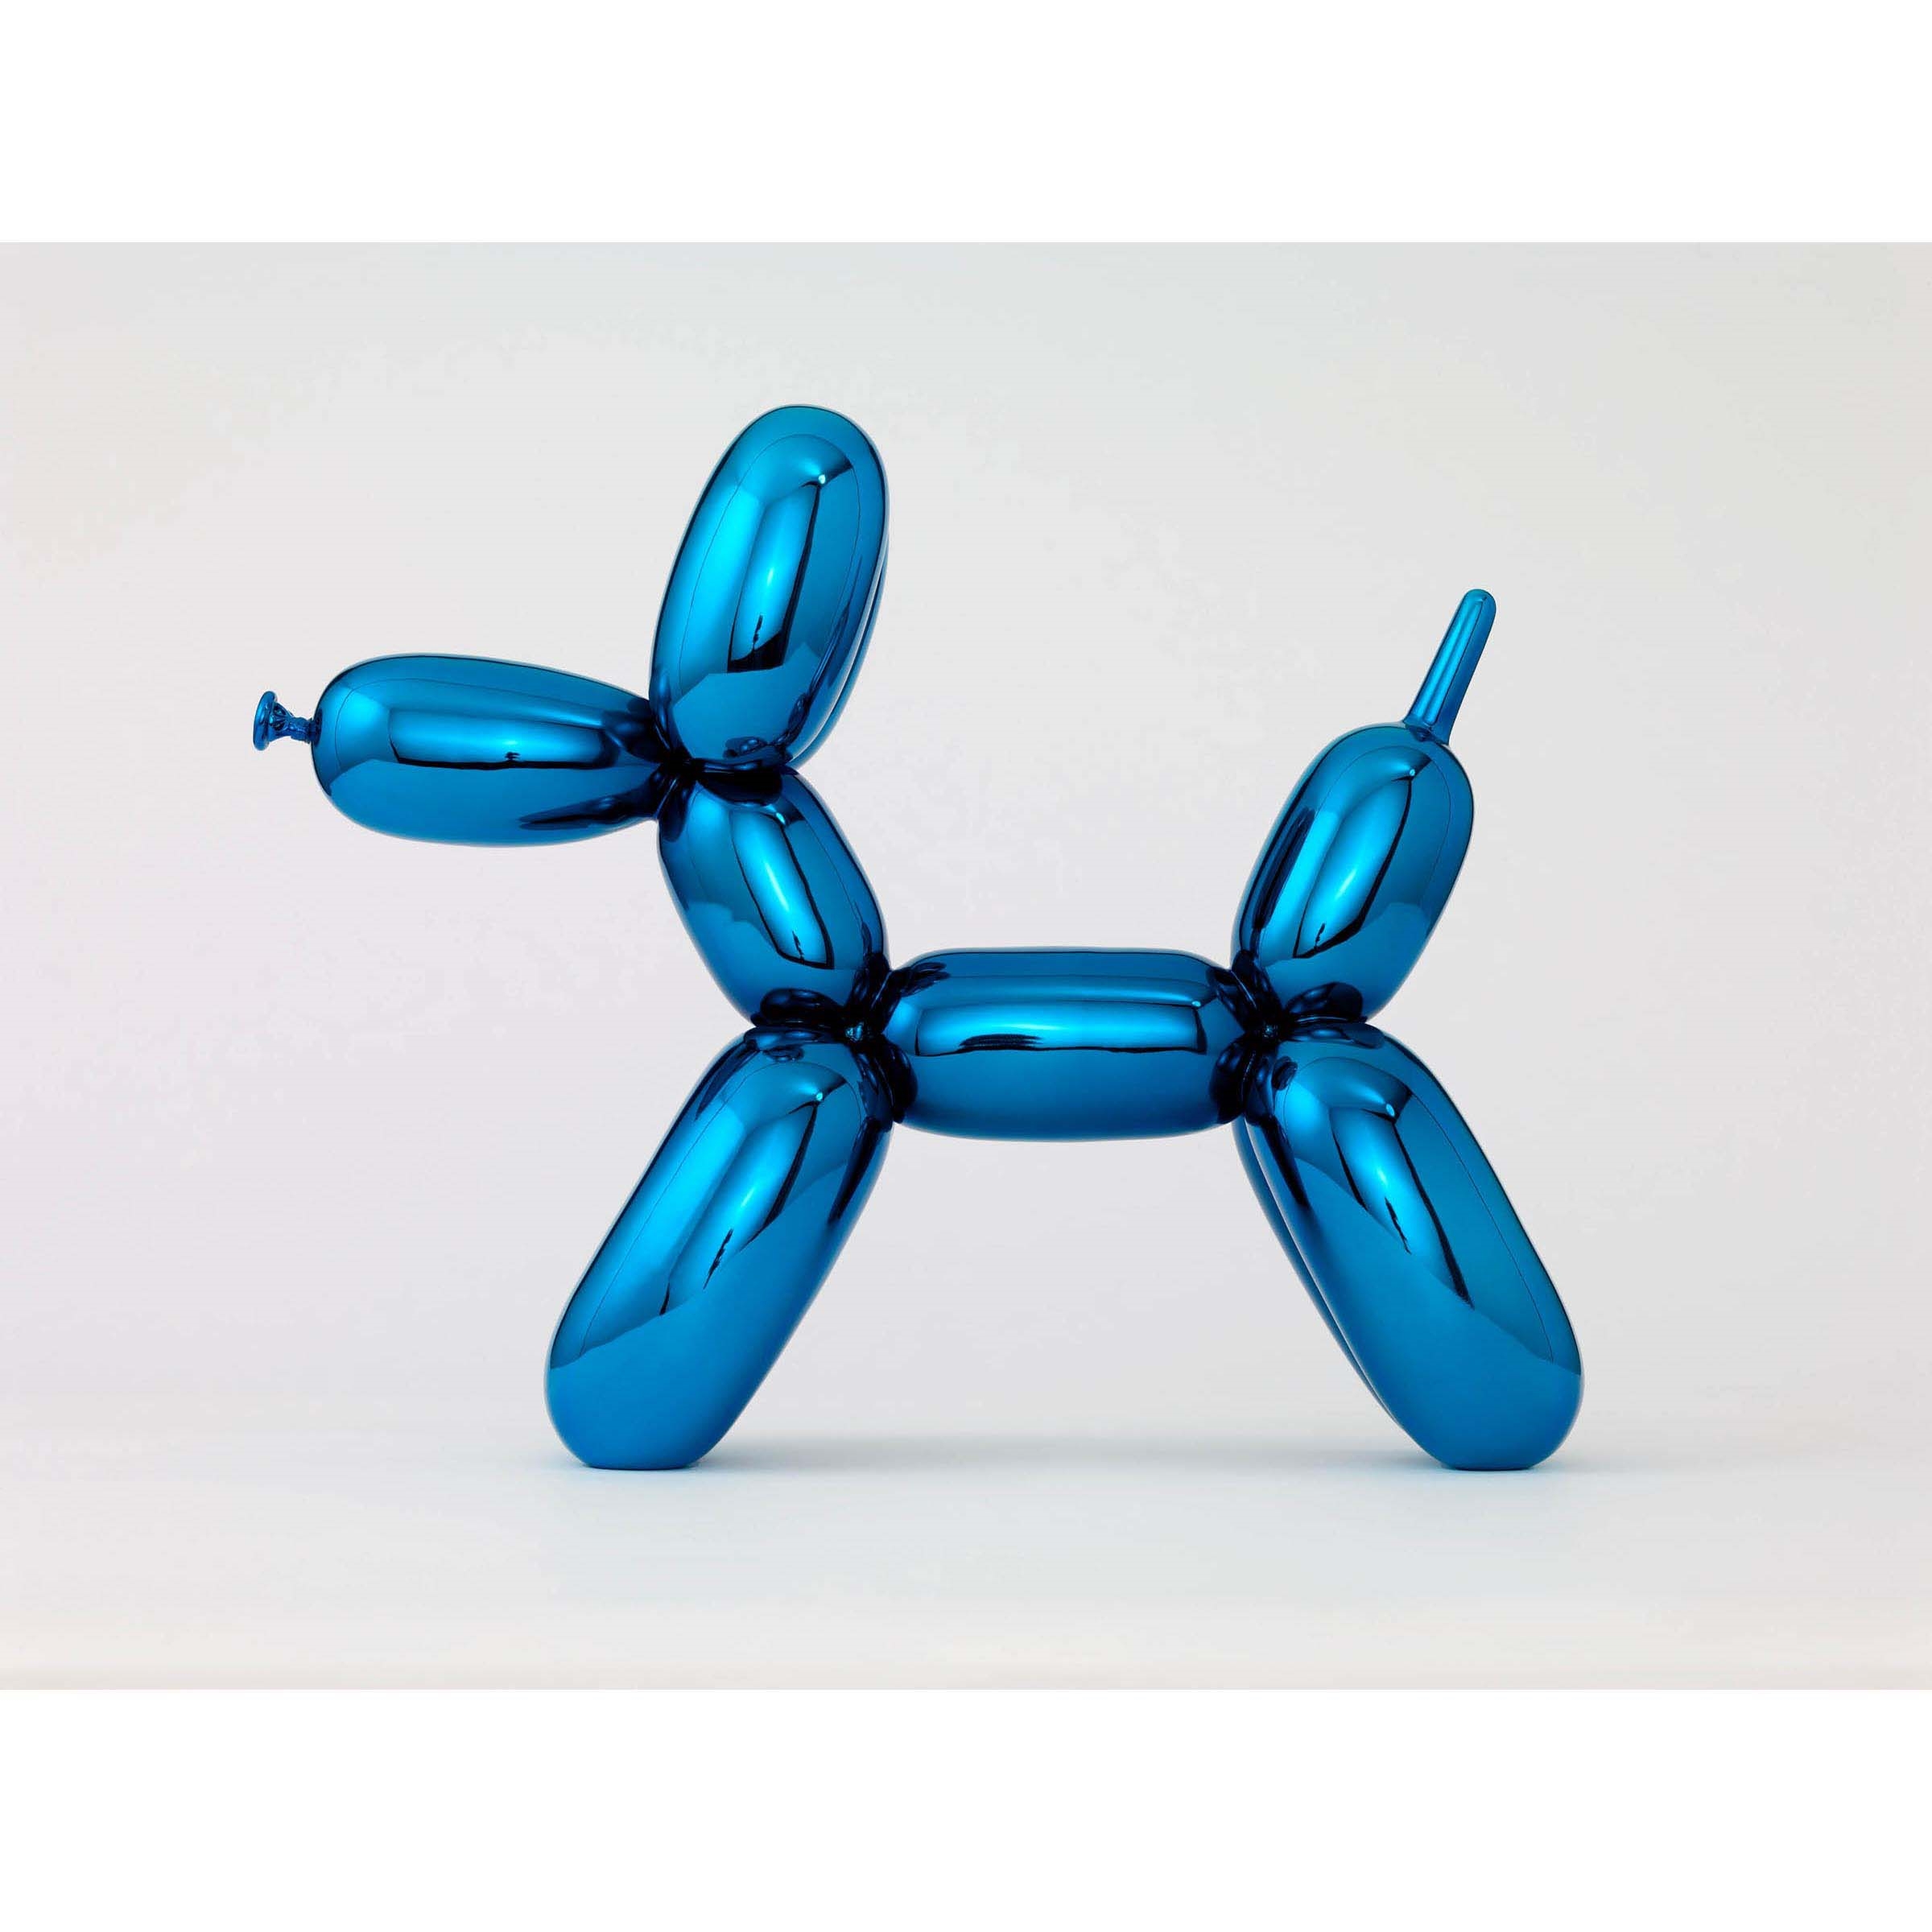 BALLOON DOG (BLUE), 2021 by Jeff Koons, 2021